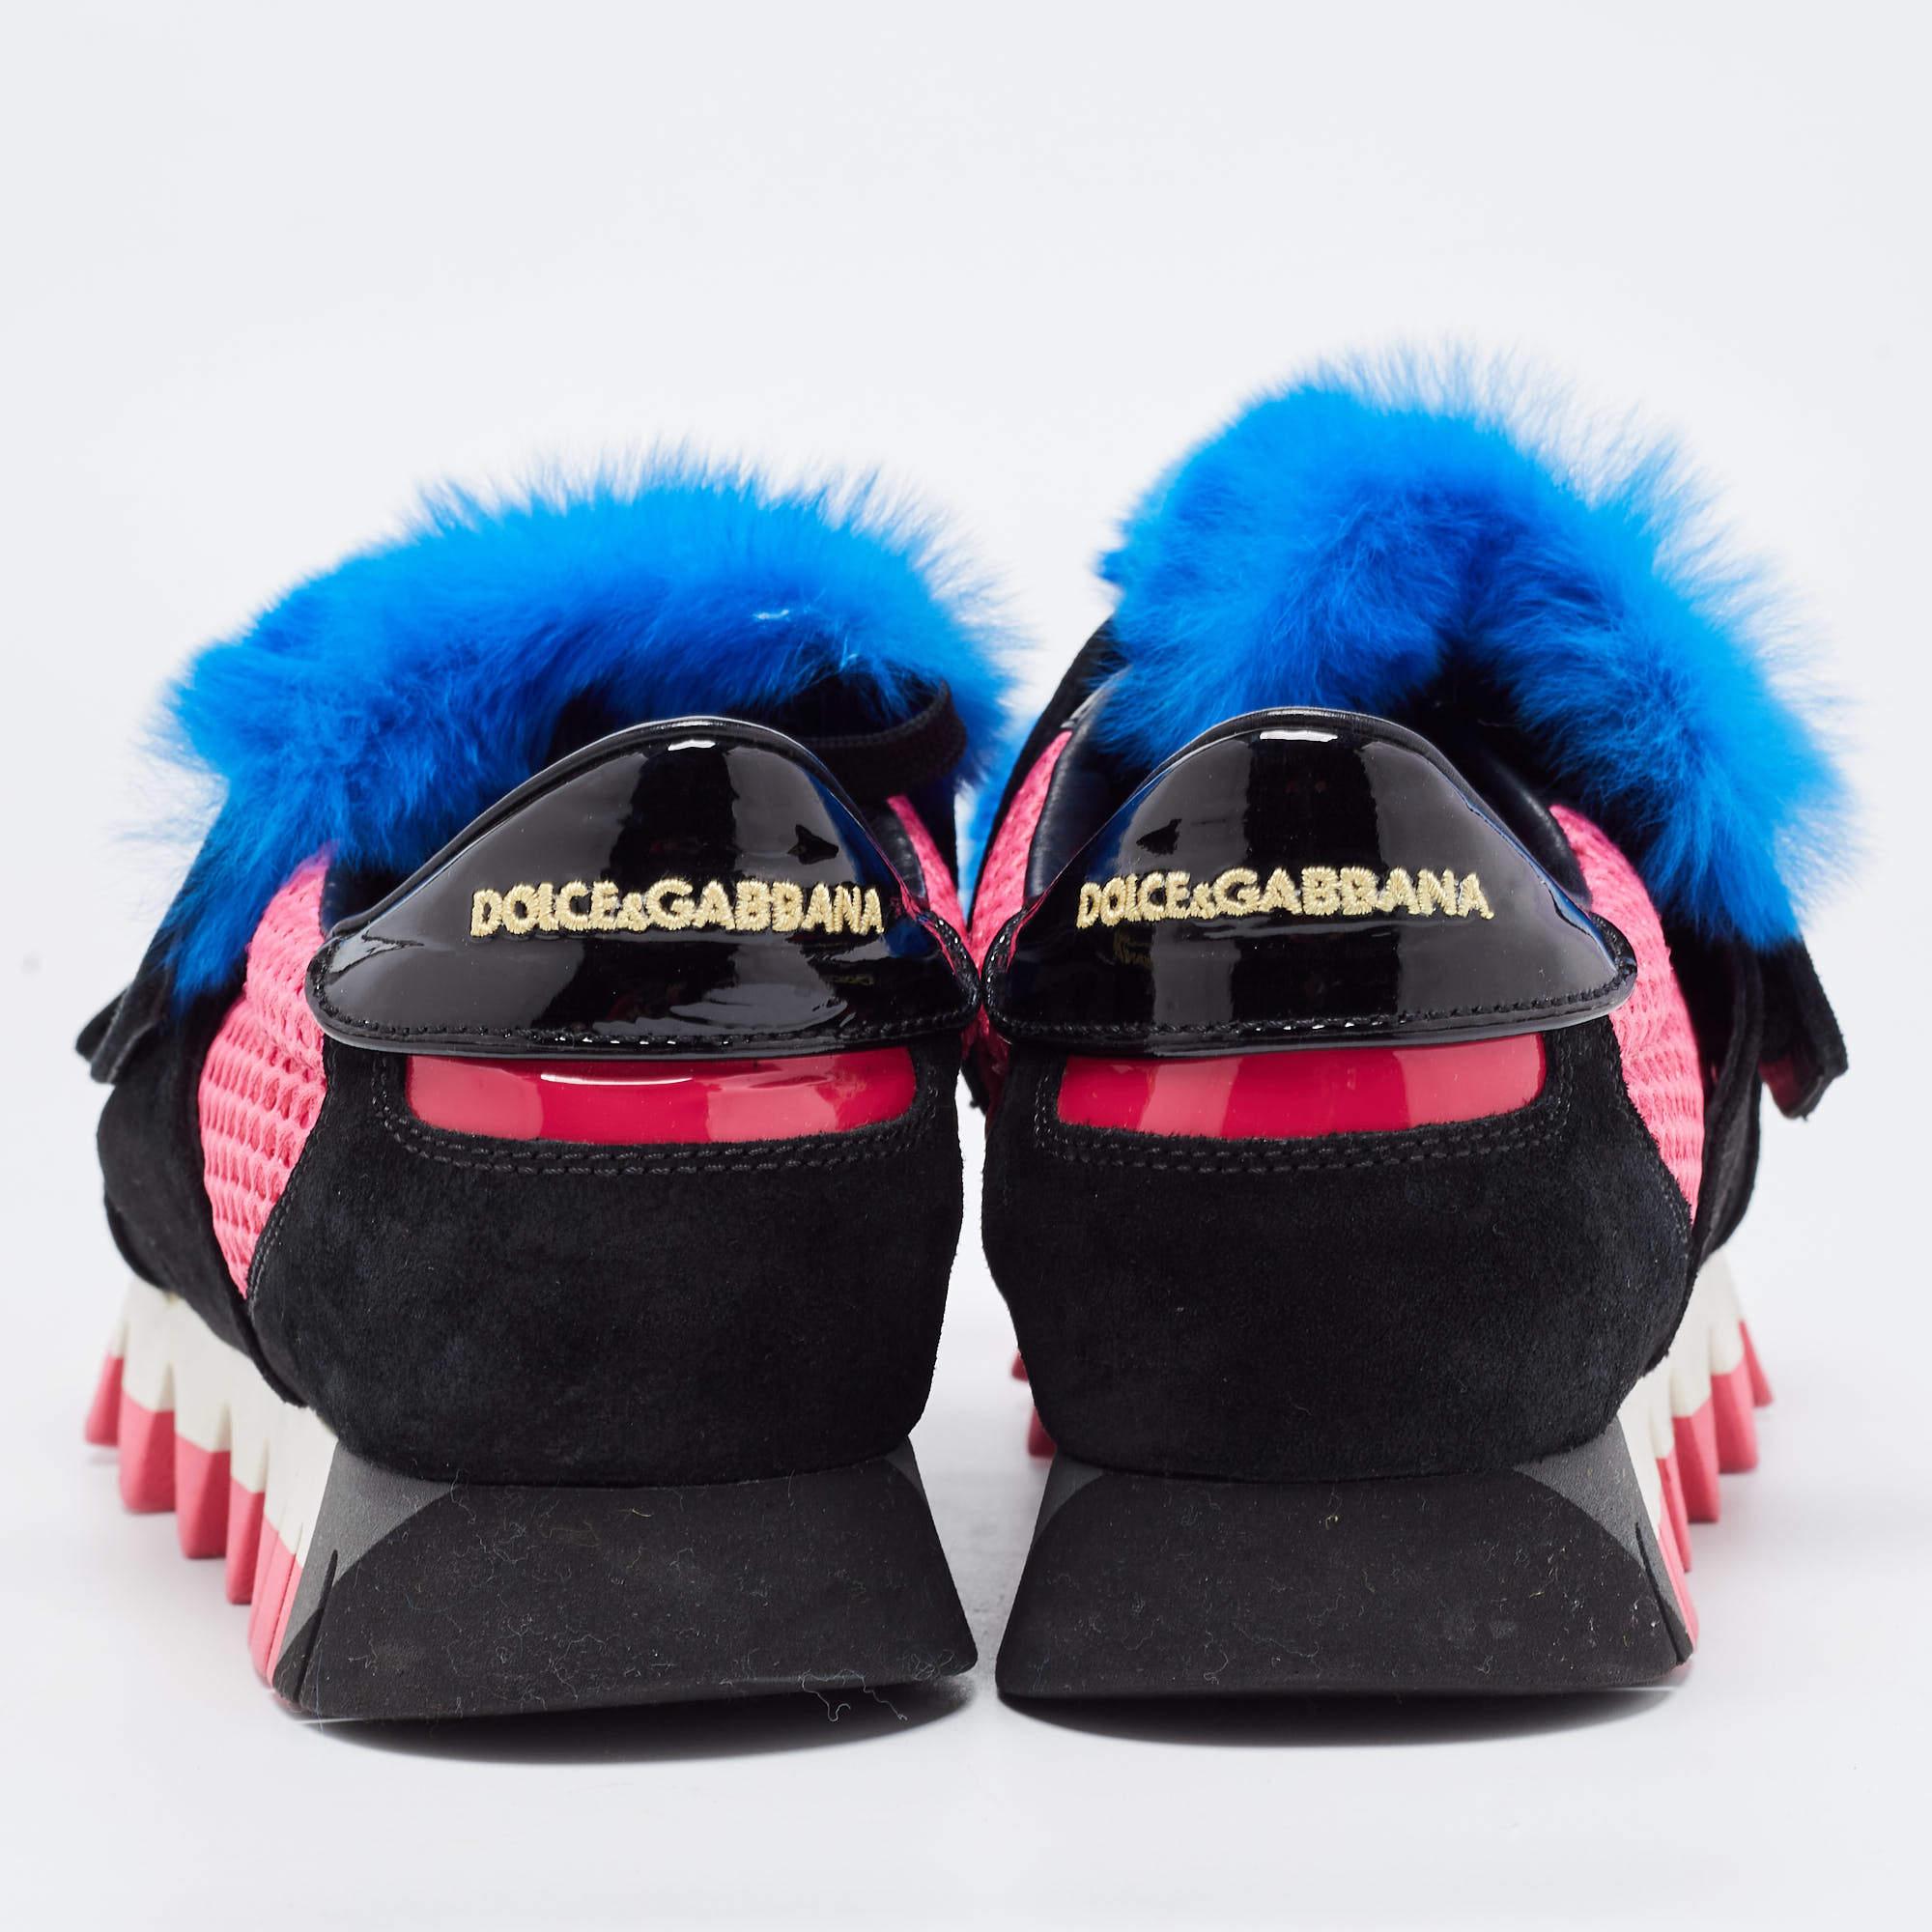 Dolce & Gabbana Tricolor Suede and Mink Fur Low Top Sneakers Size 40 For Sale 2